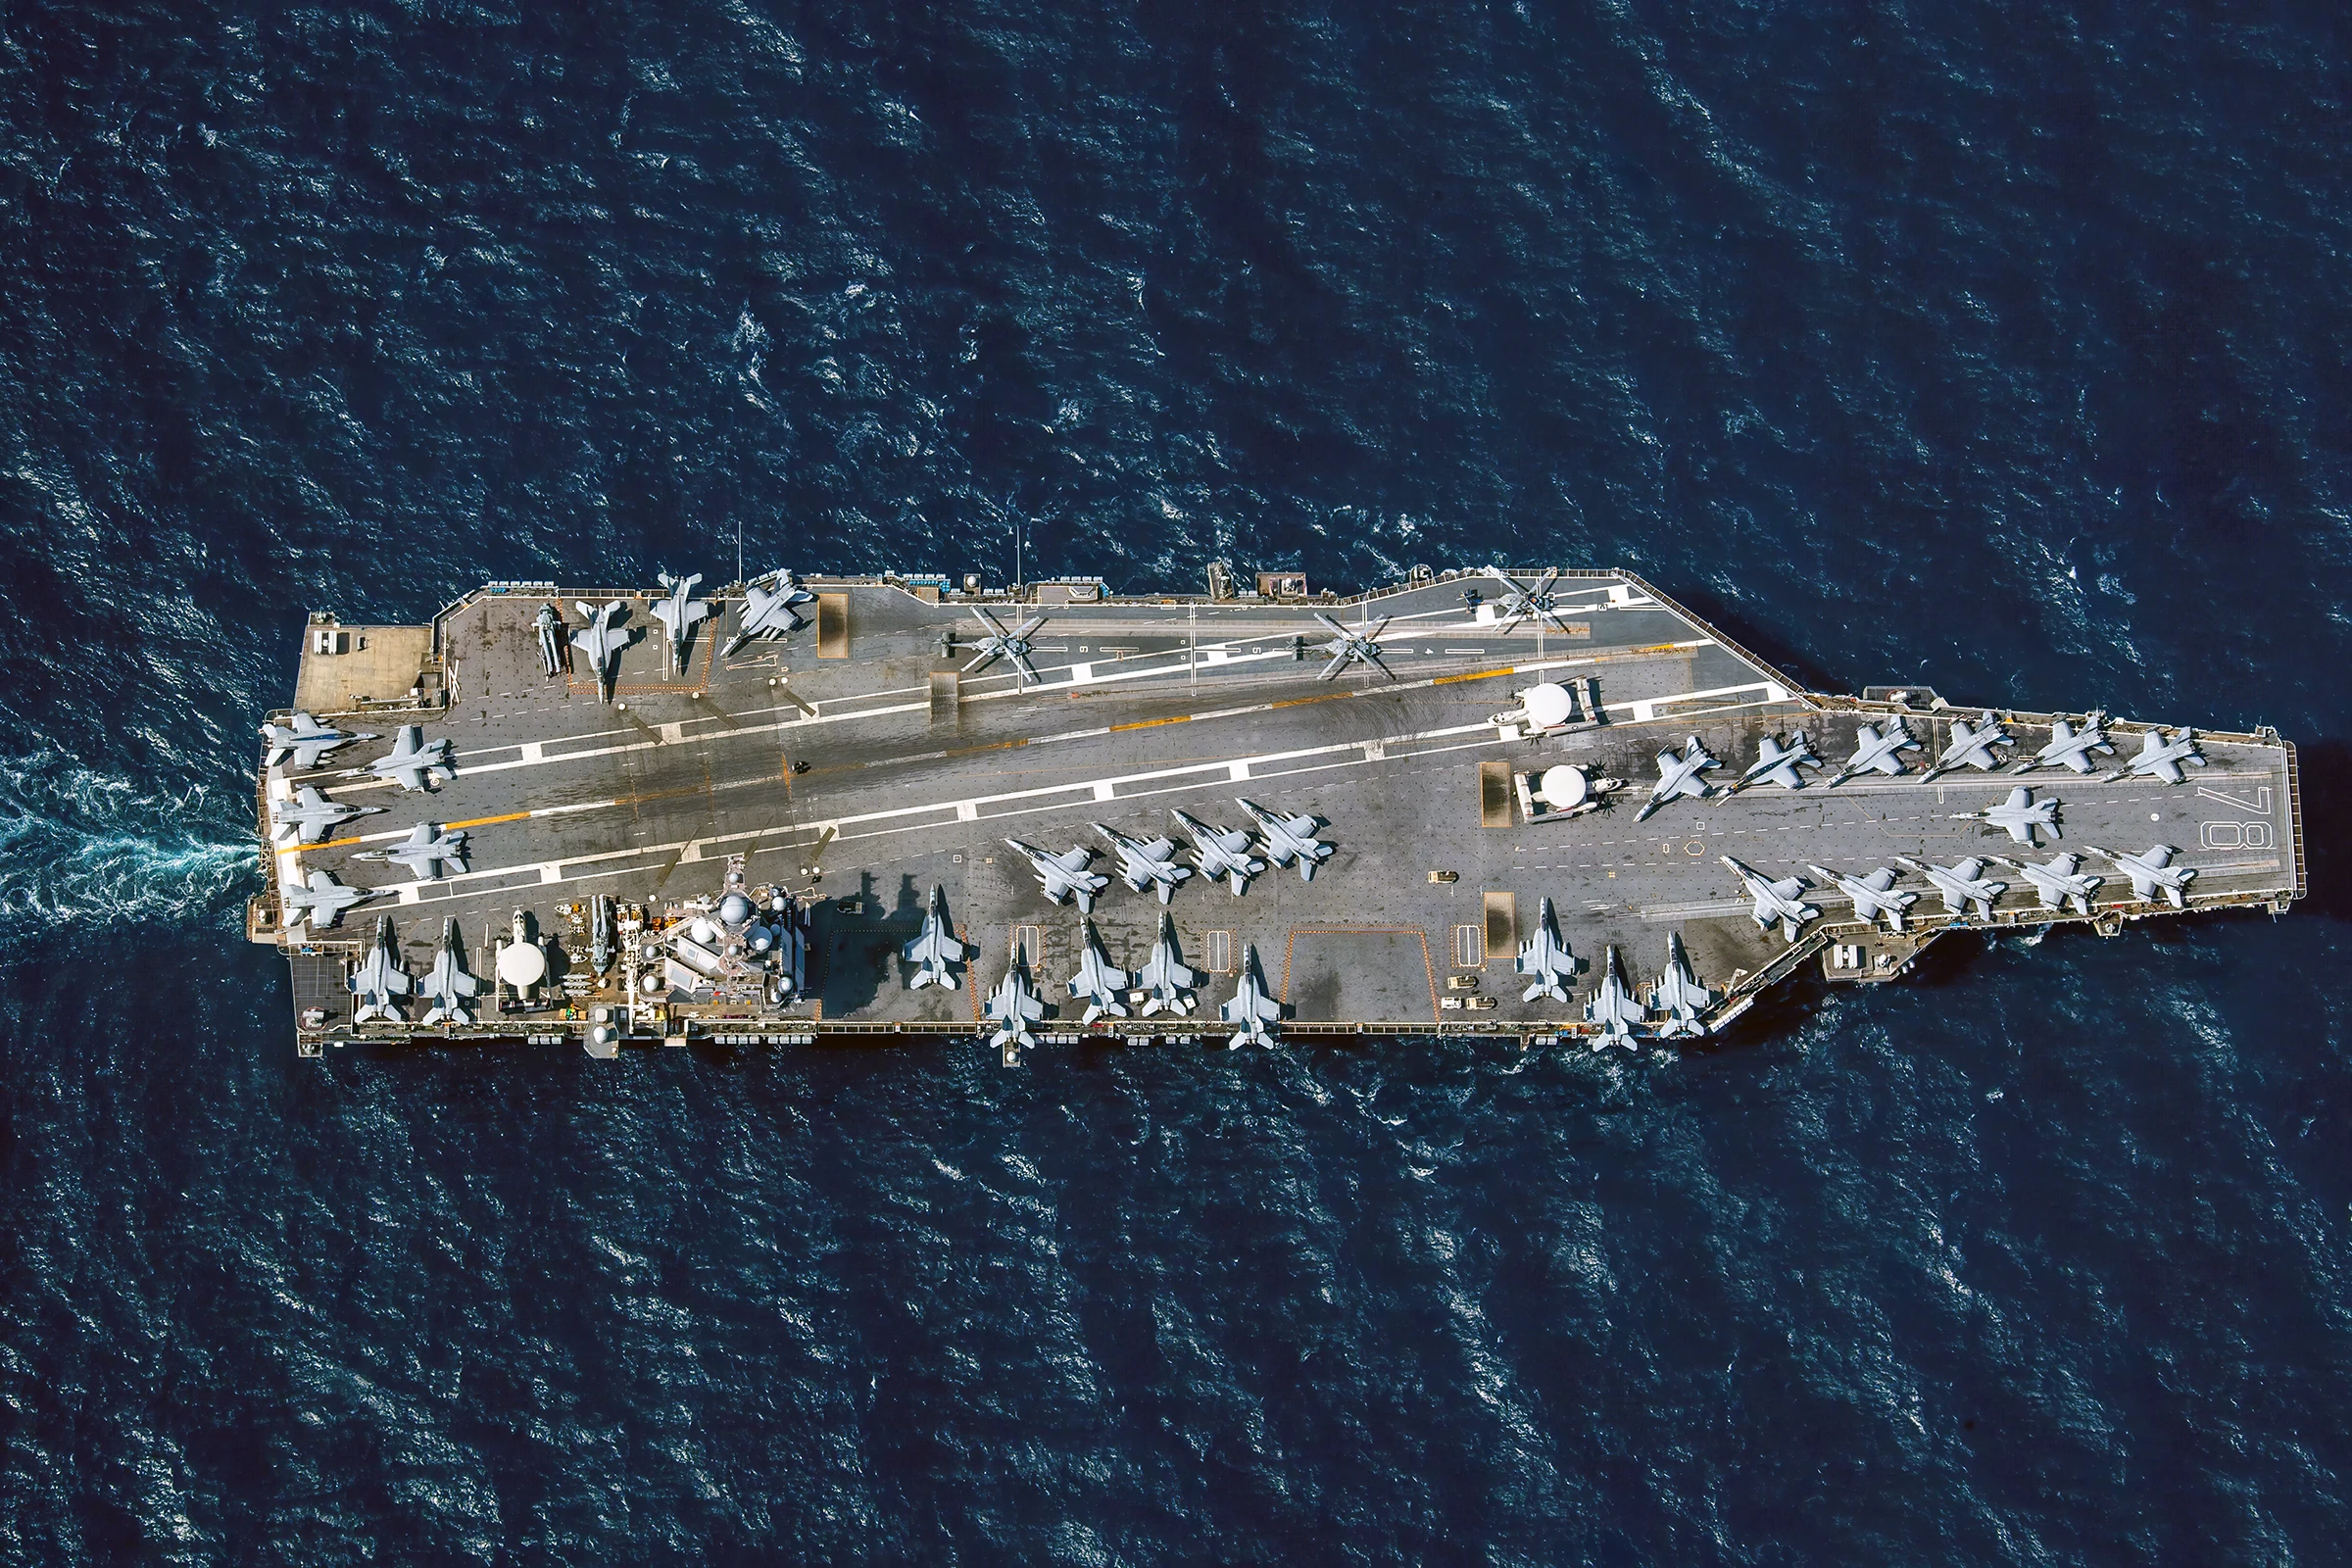 Why are the Ford-class aircraft carriers the best in history?